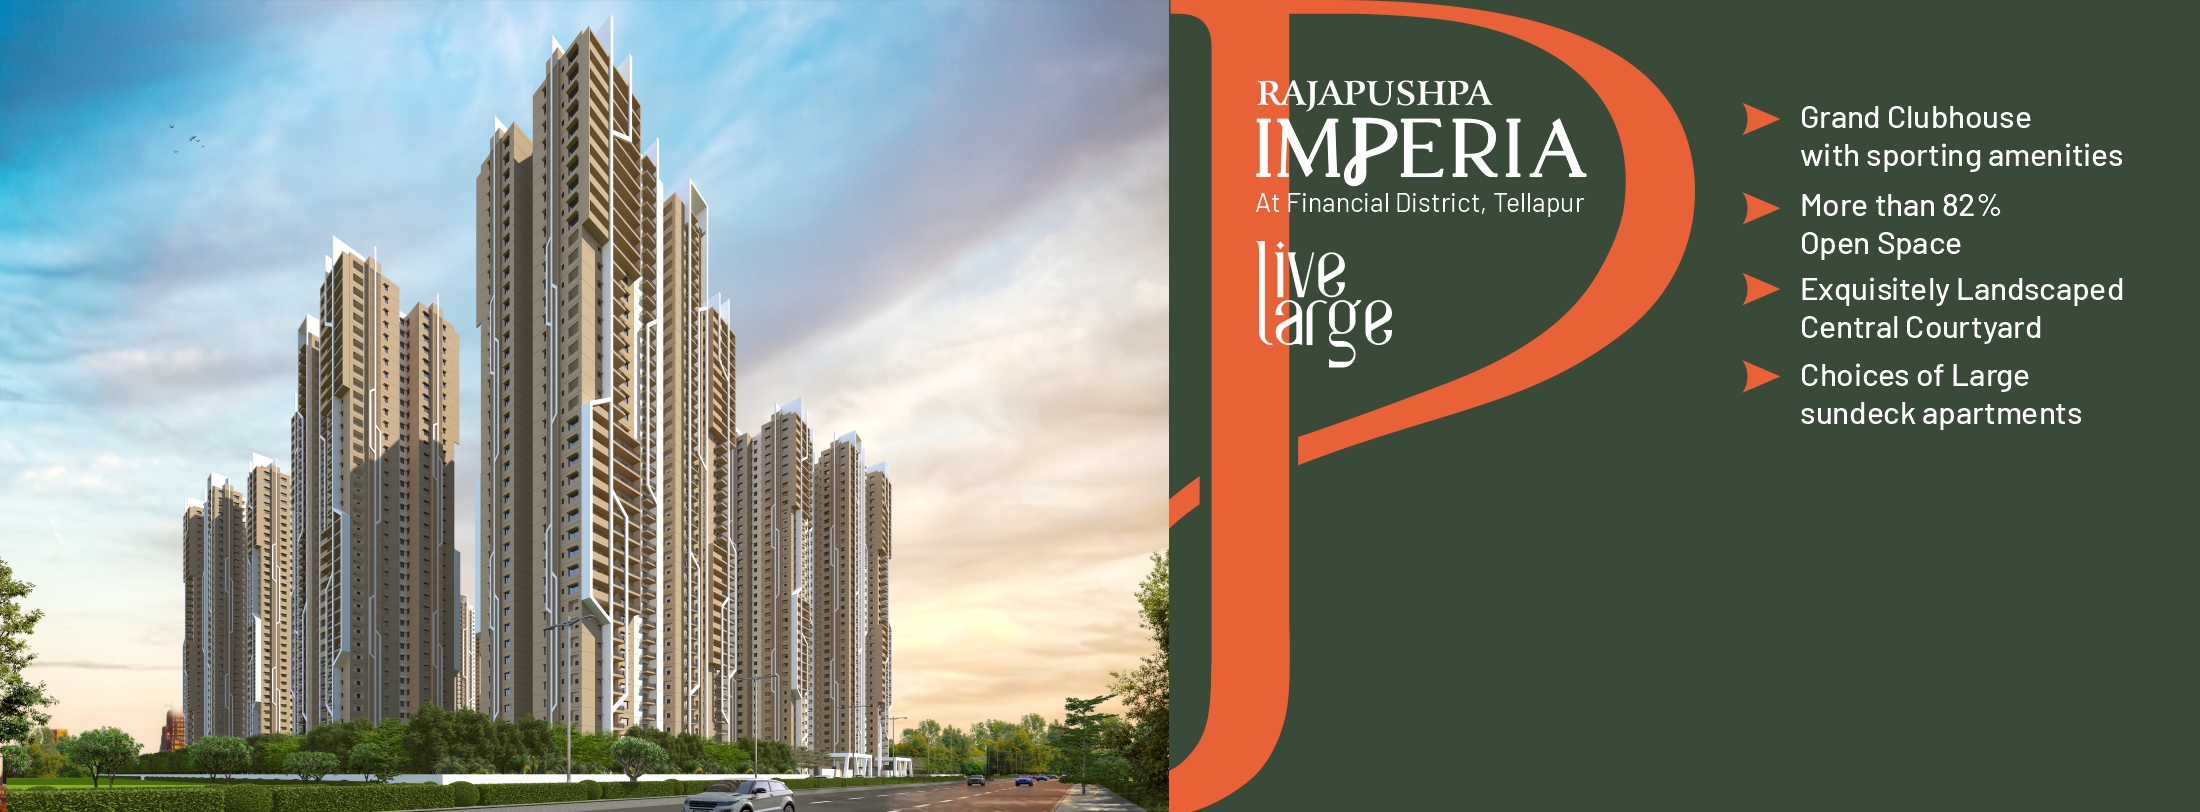 rajapushpa imperia - Experience an elevated Lifestyle. Live Large